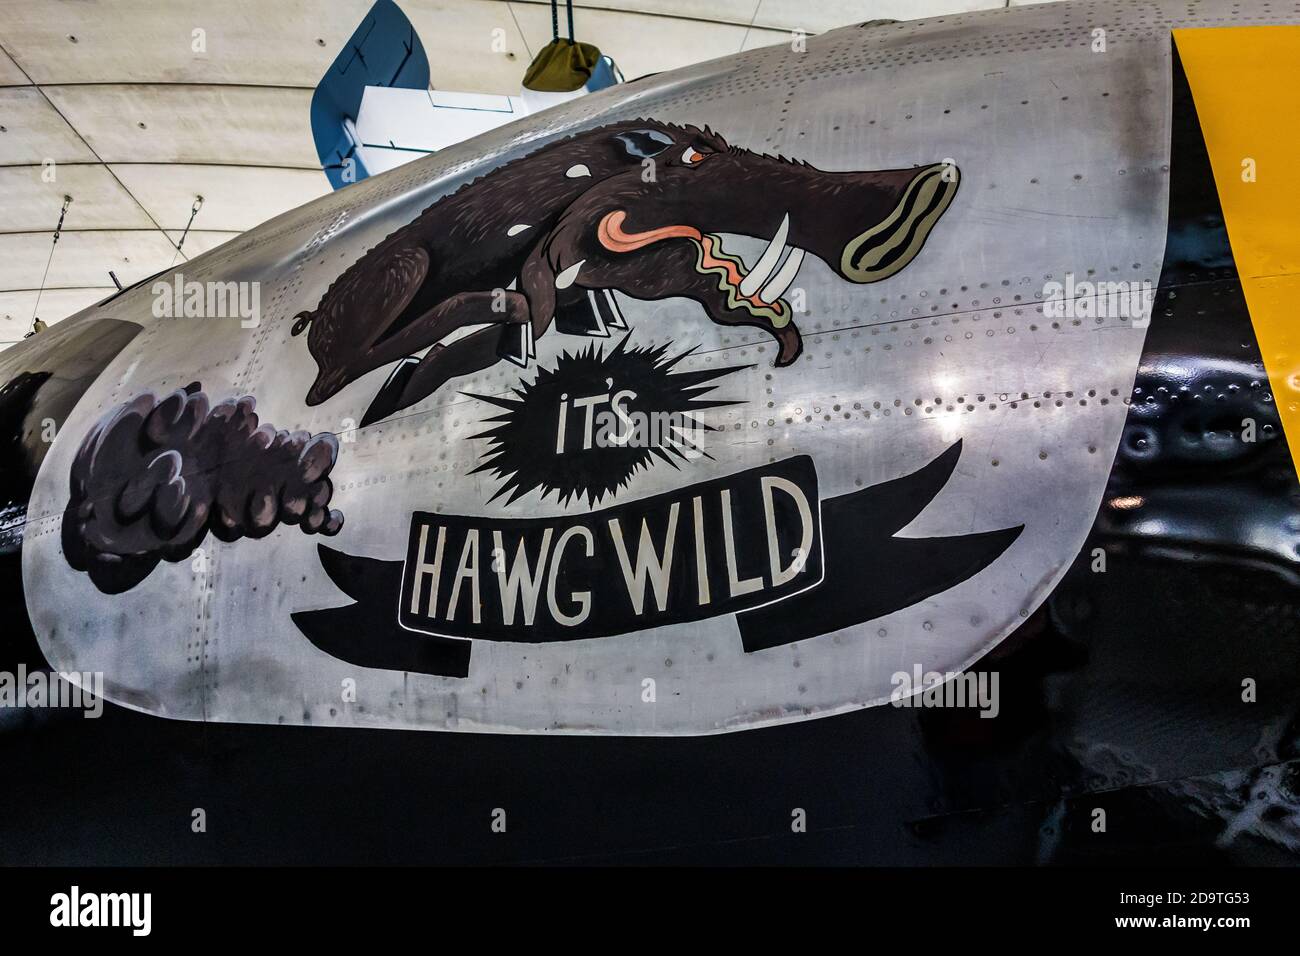 IT'S HAWG WILD, Boeing B-29 Superfortresses, Nose art Stock Photo